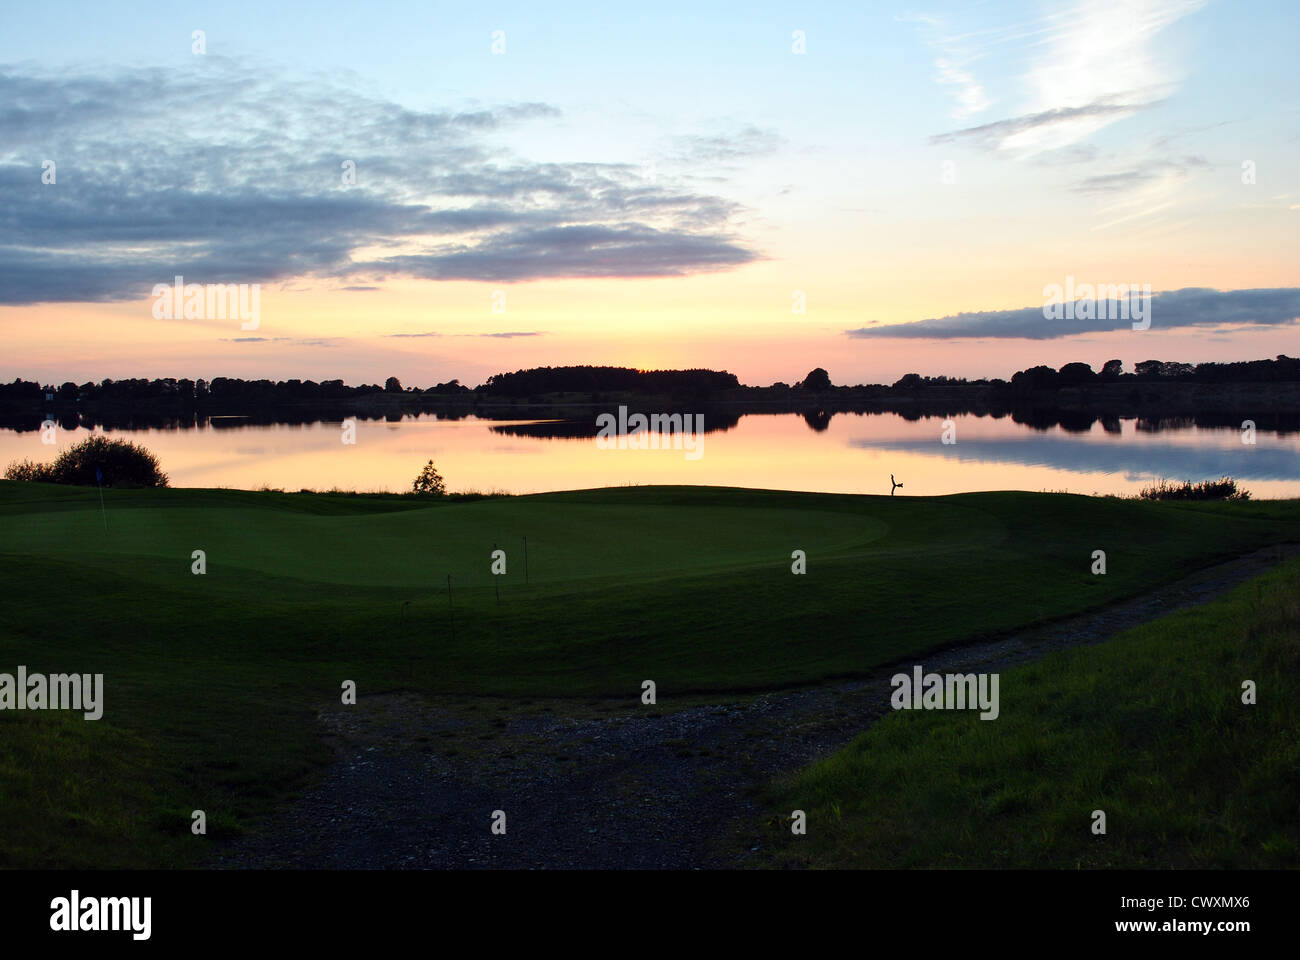 sunset over a lake on a golf course in wicklow ireland Stock Photo